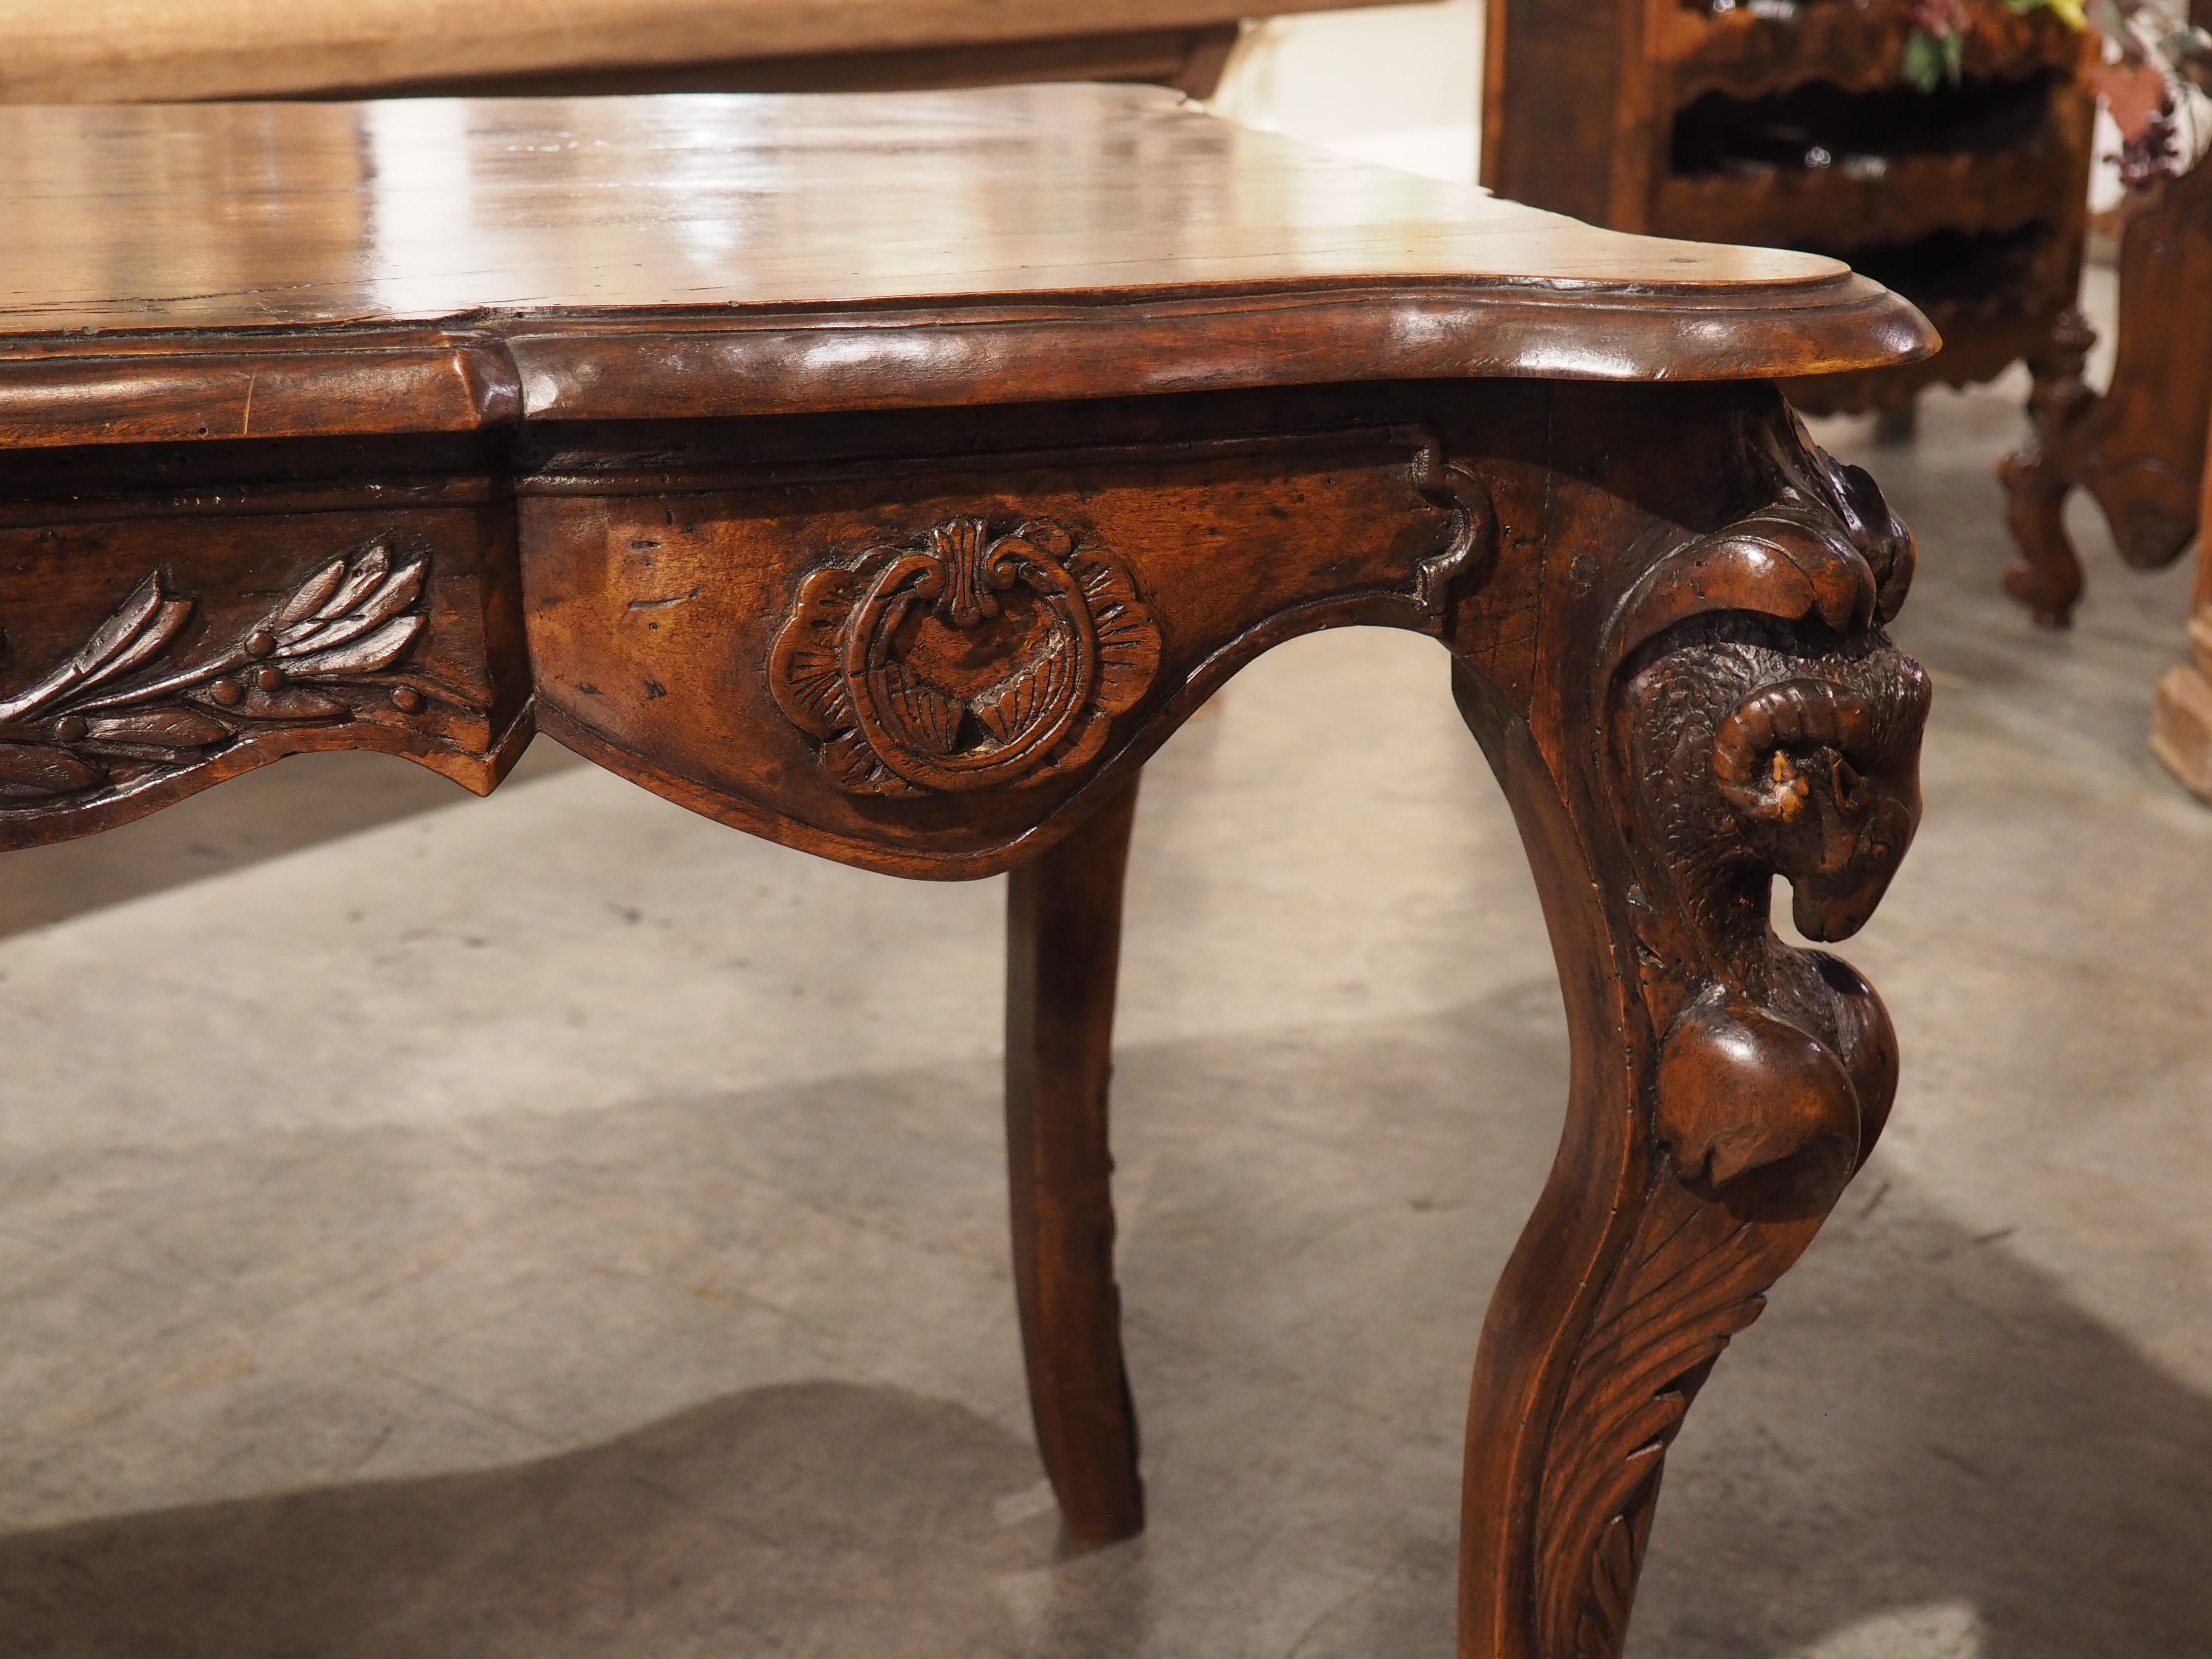 Circa 1870 French Walnut Wood Center Table with Rams' Heads and Fleur De Lys For Sale 2